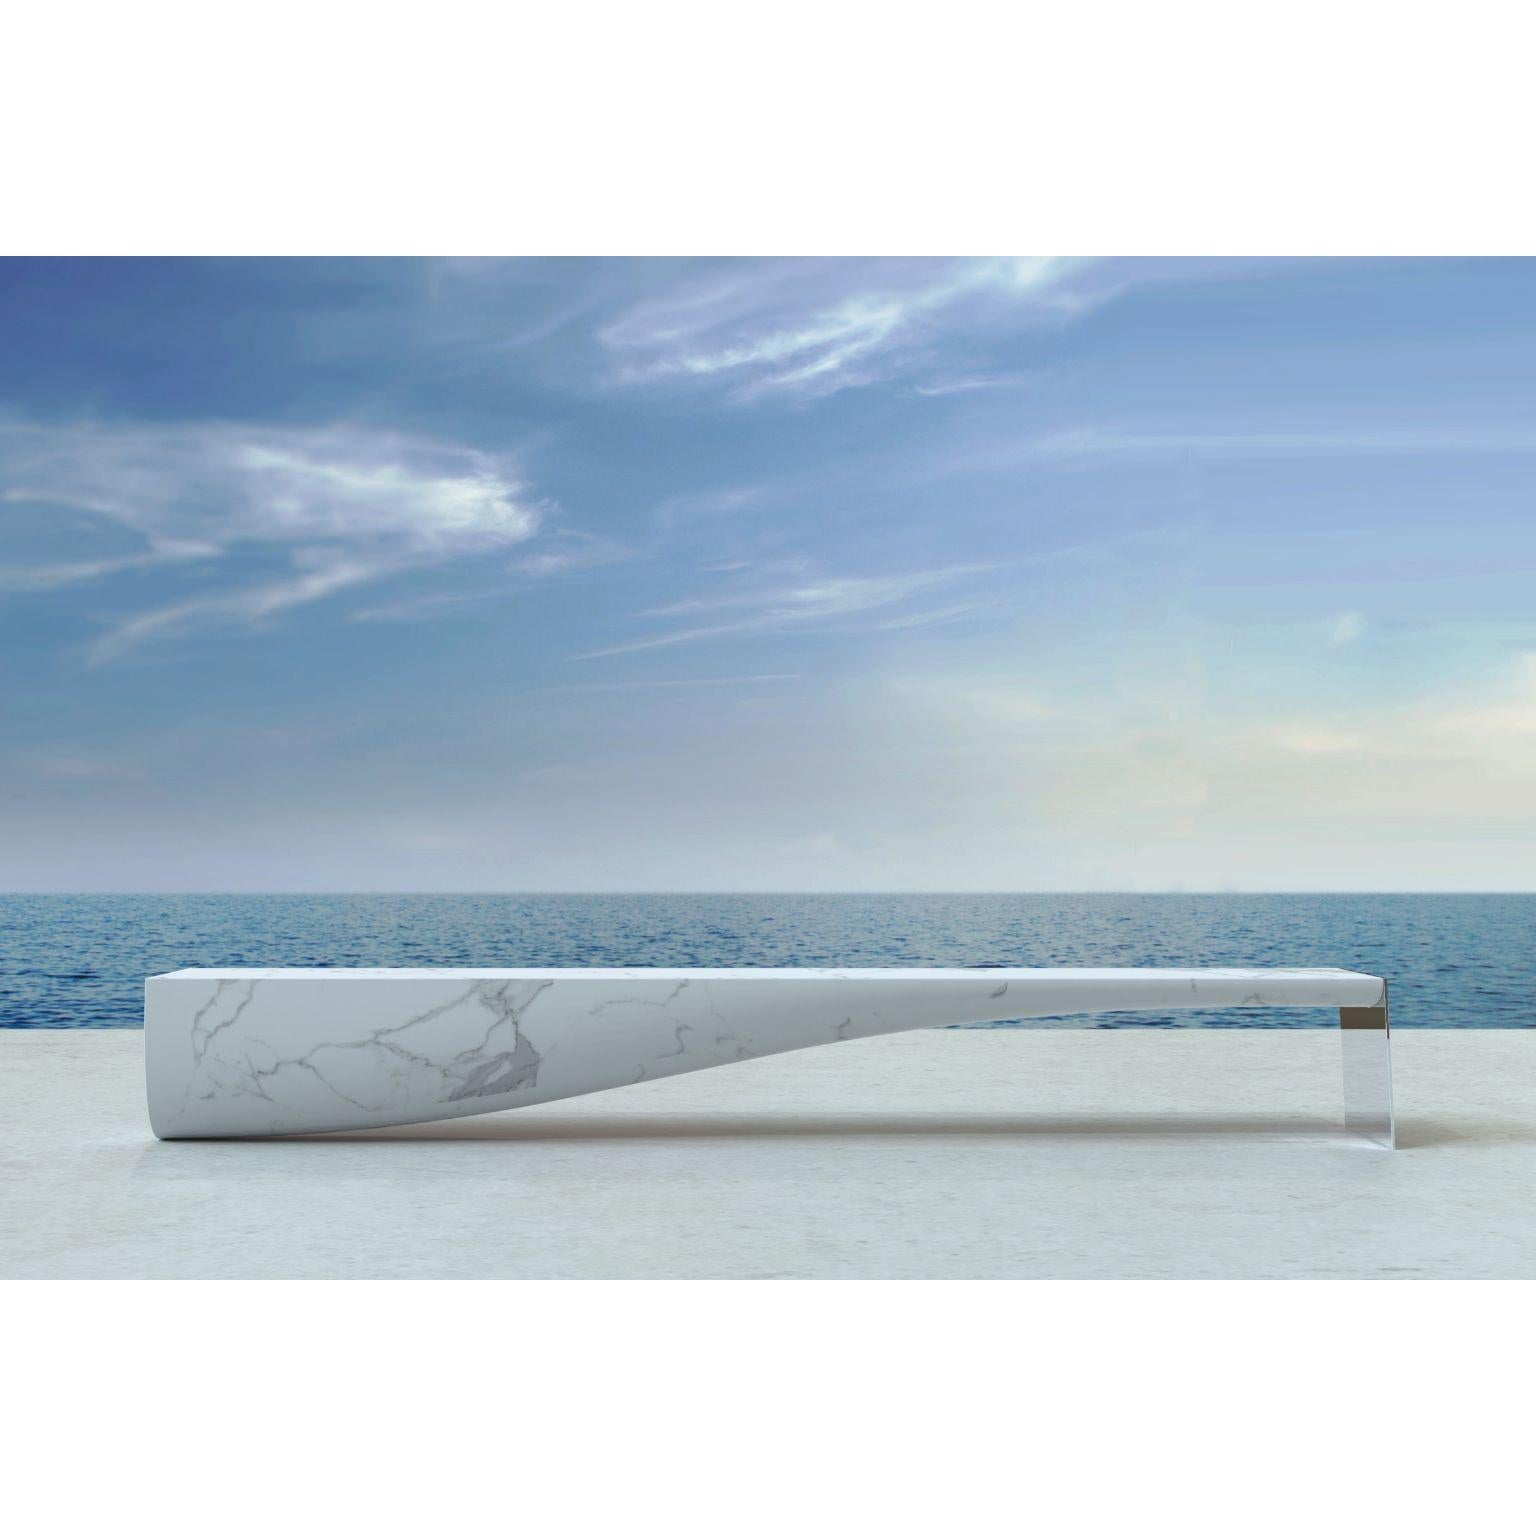 Ula Sculpture White Bench by Veronica Mar
Dimensions: D300 x W40 x H40 cm
Materials: White Macael
Weight: 2200kg.

Custom Dimensions and type of marble Available Upon Request. It is available in from 2 meters up to 3 meters long.

Veronica is